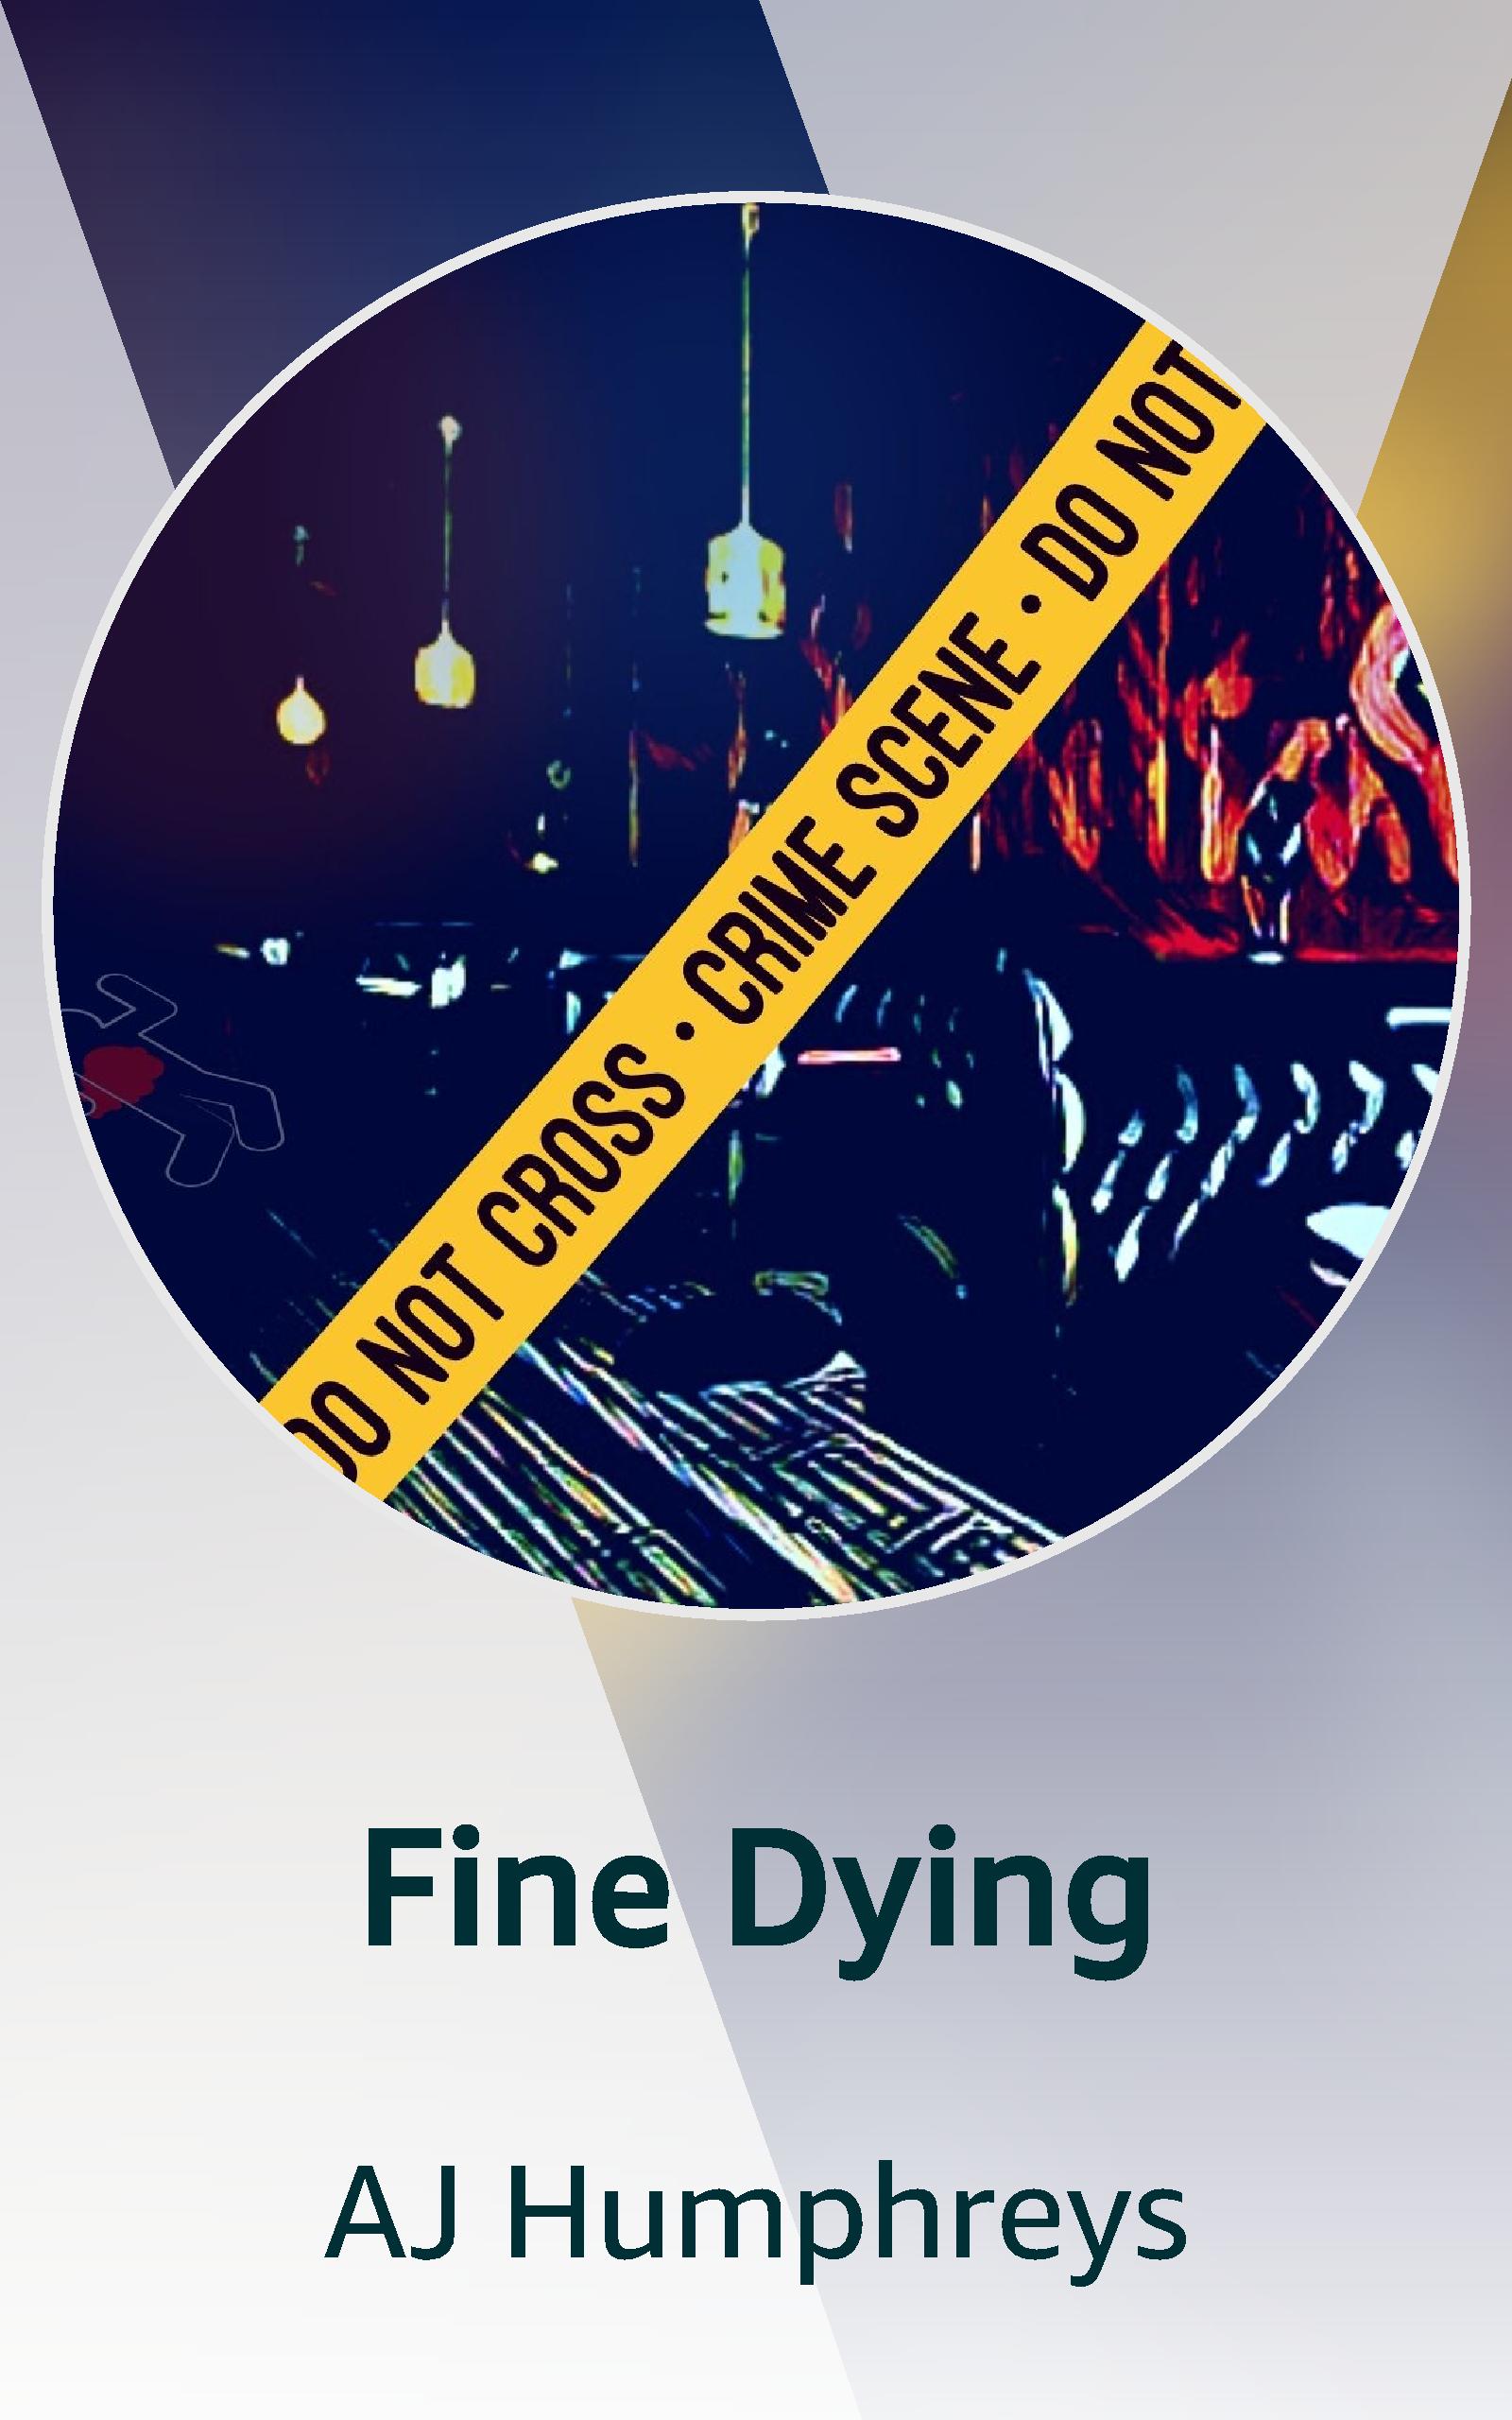 Cover image redirects to fine dying by aj humphreys on kindle vella